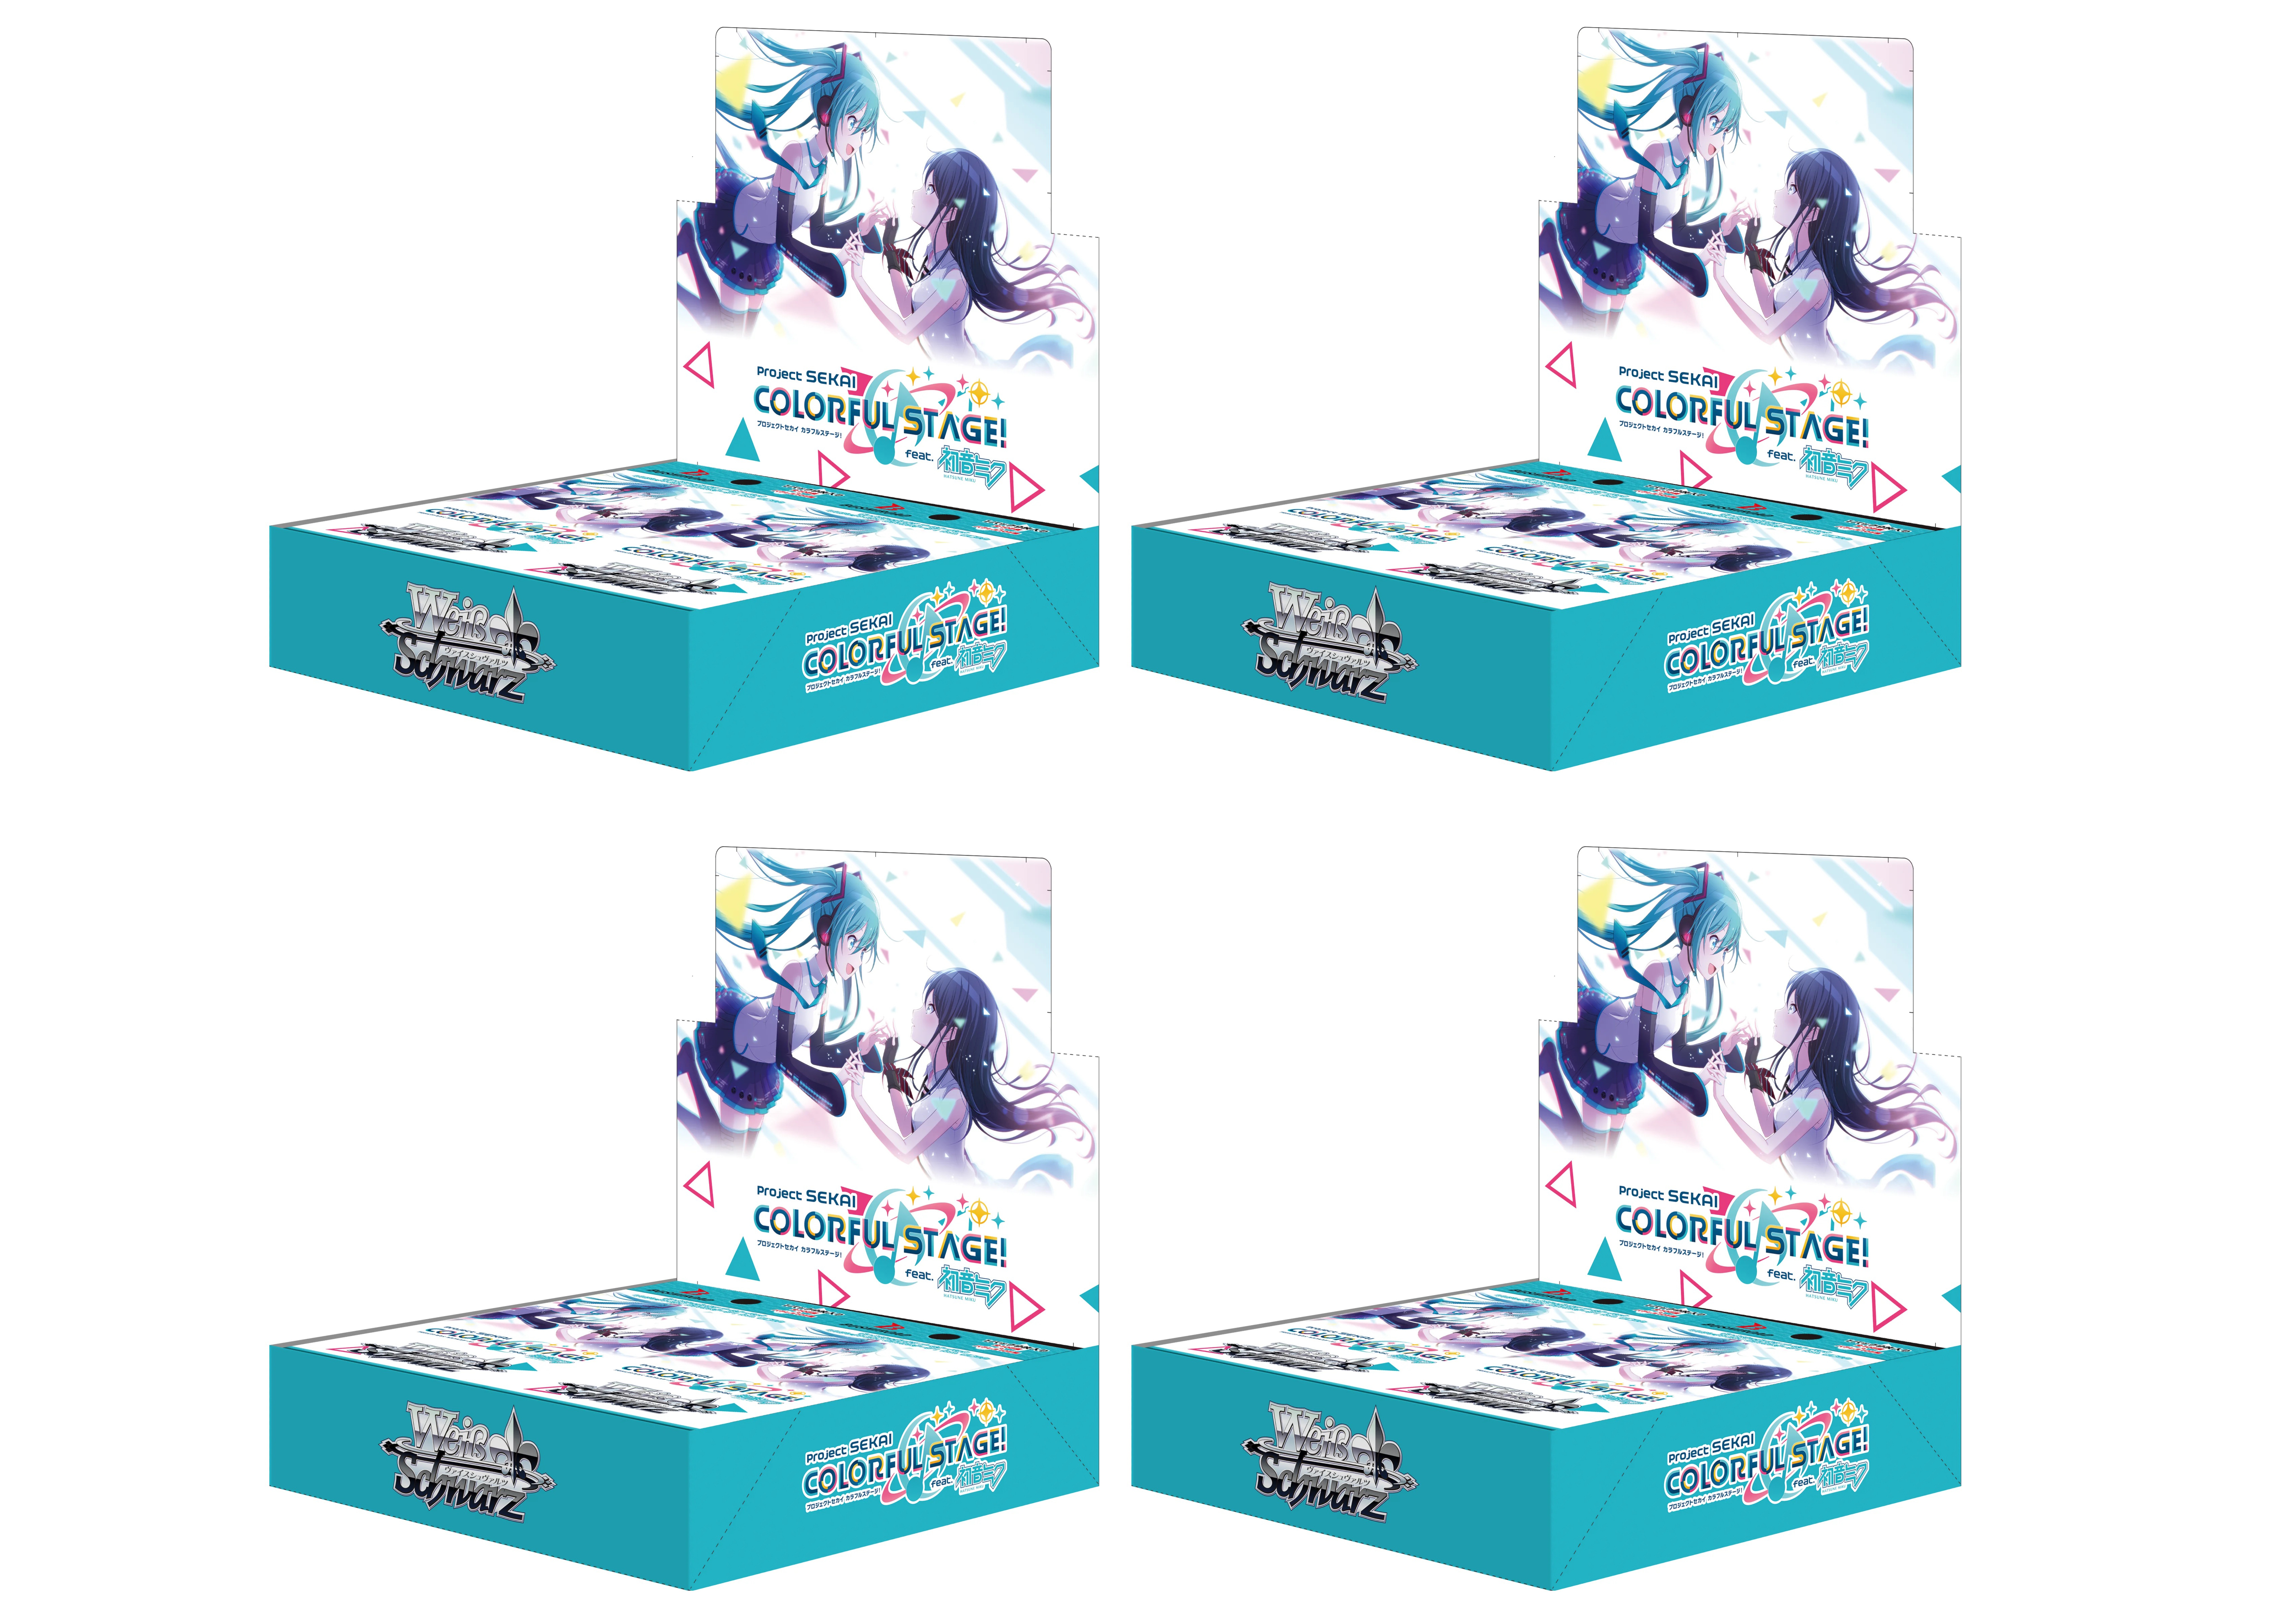 Weiss Schwarz Project Sekai Colorful Stage! Hatsune Miku Booster 